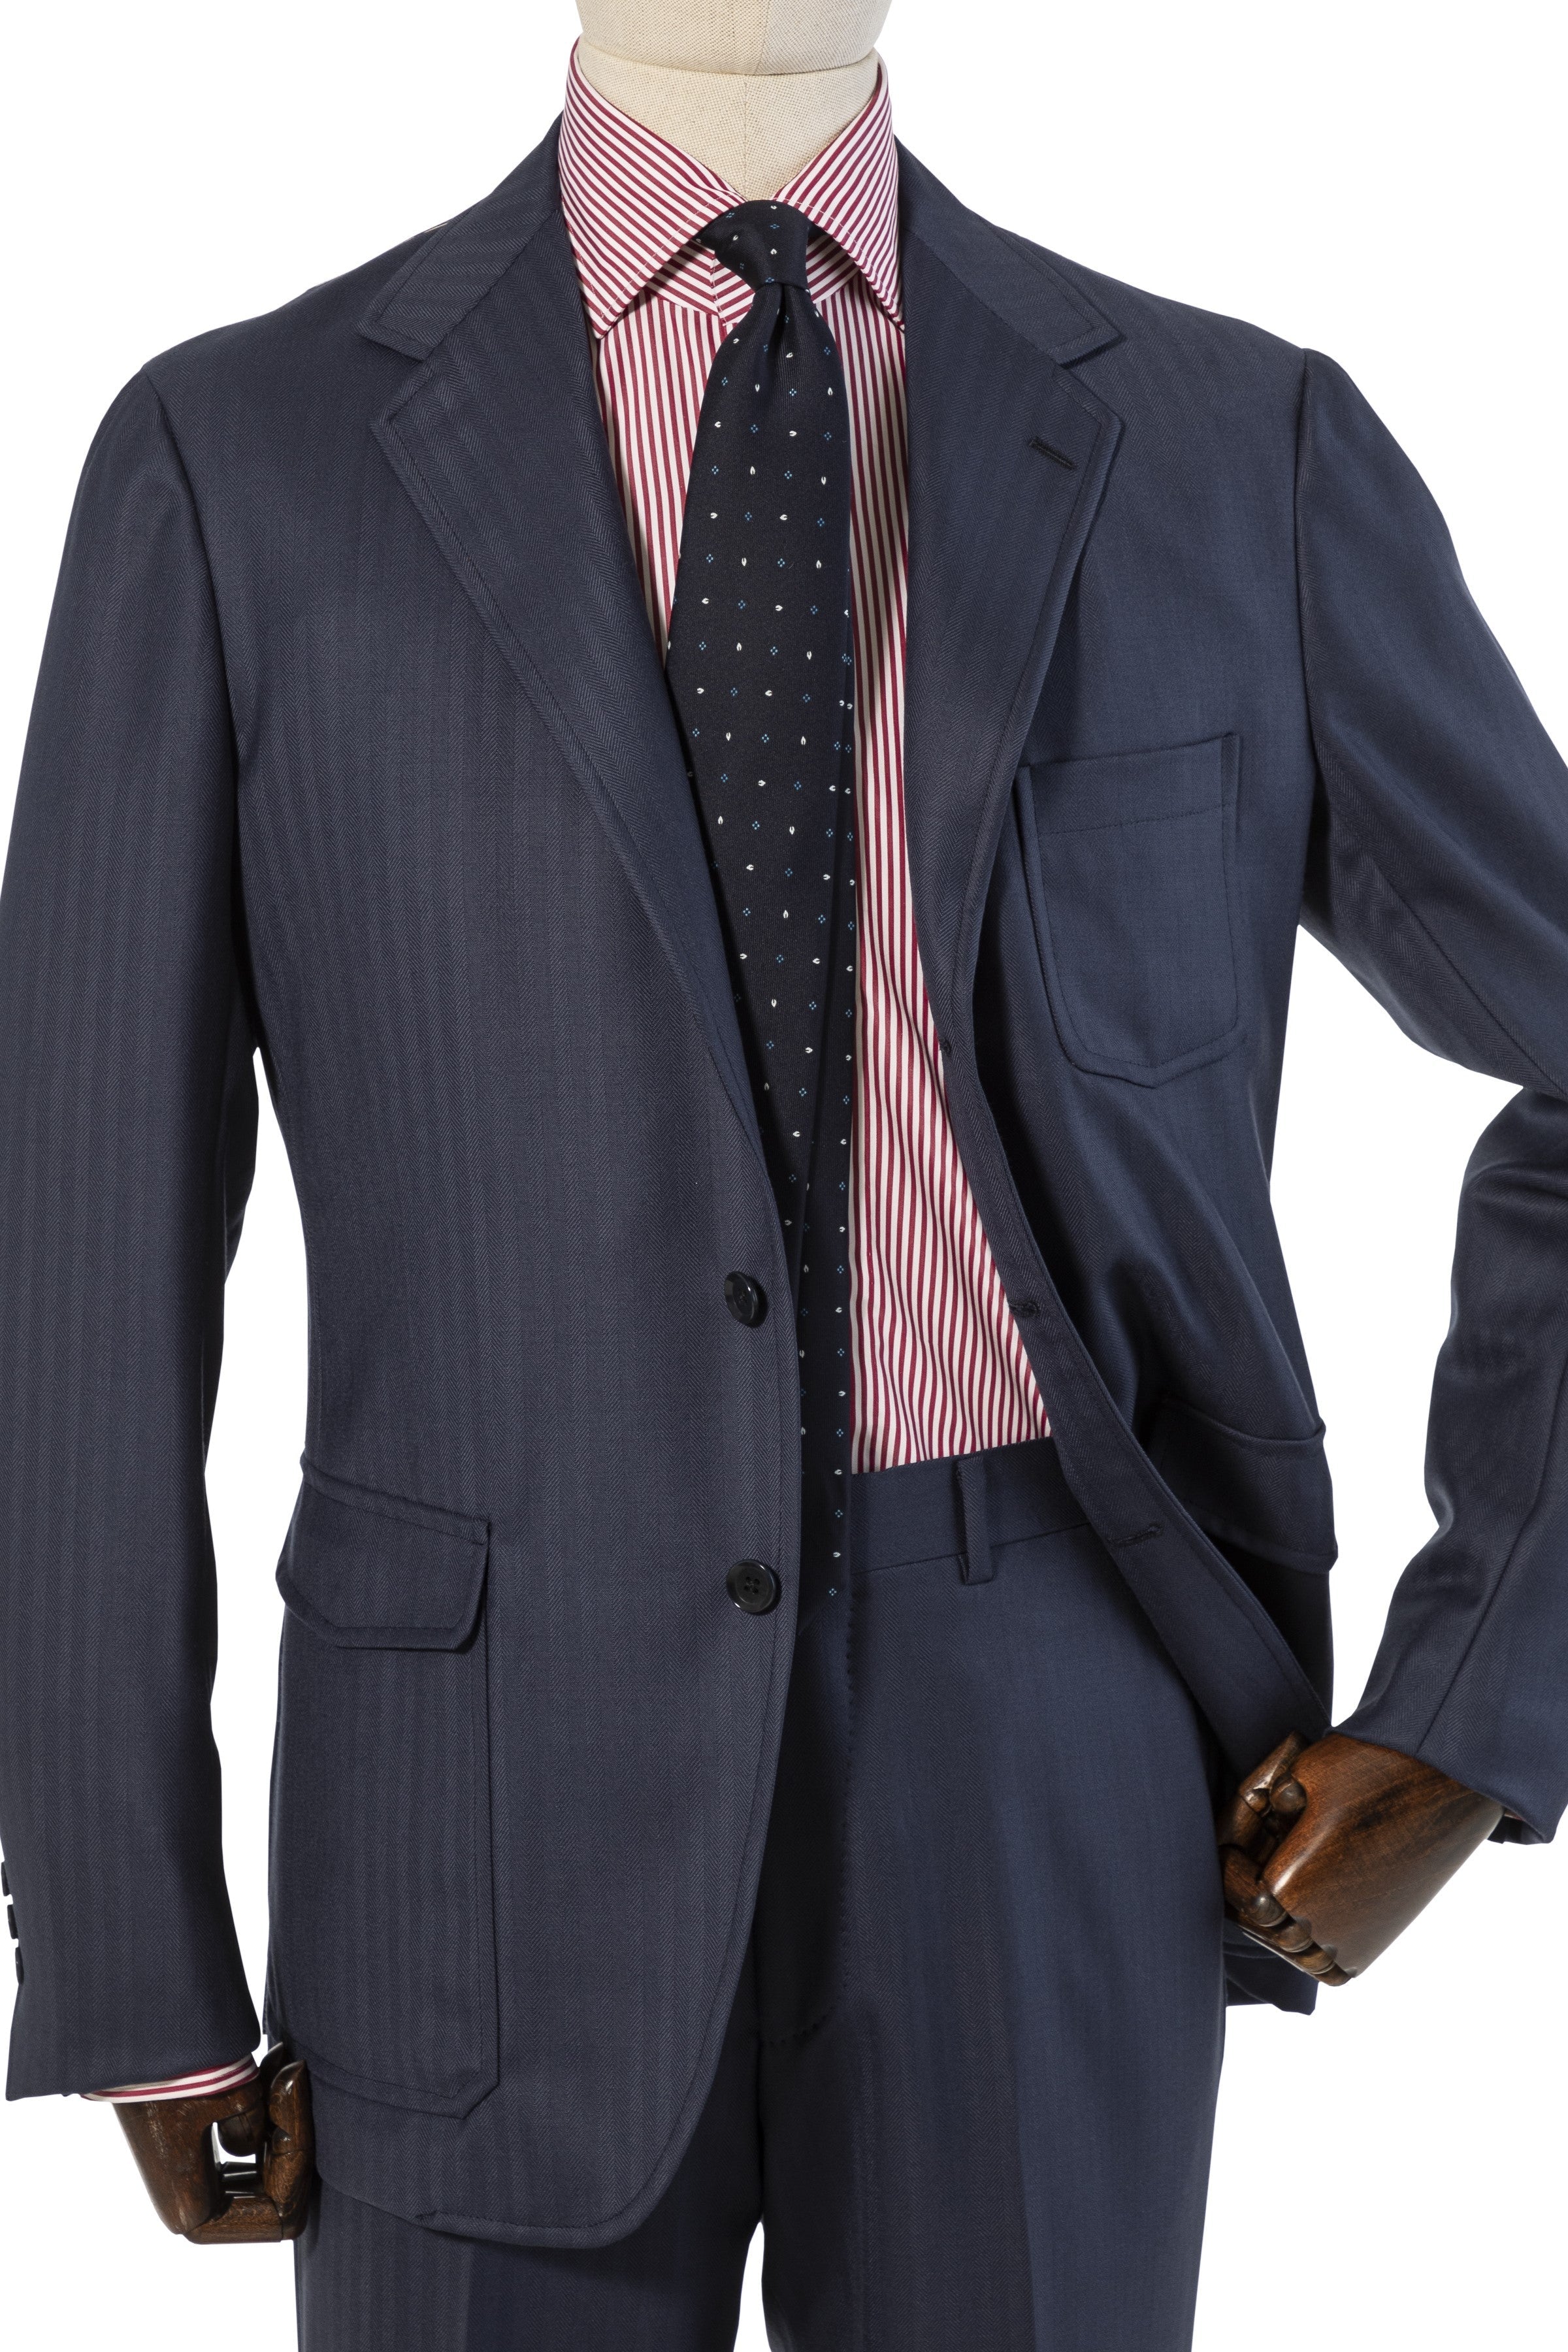 The Armoury by Ring Jacket Model 11A Royal Blue Dormeuil Wool Herringbone Suit